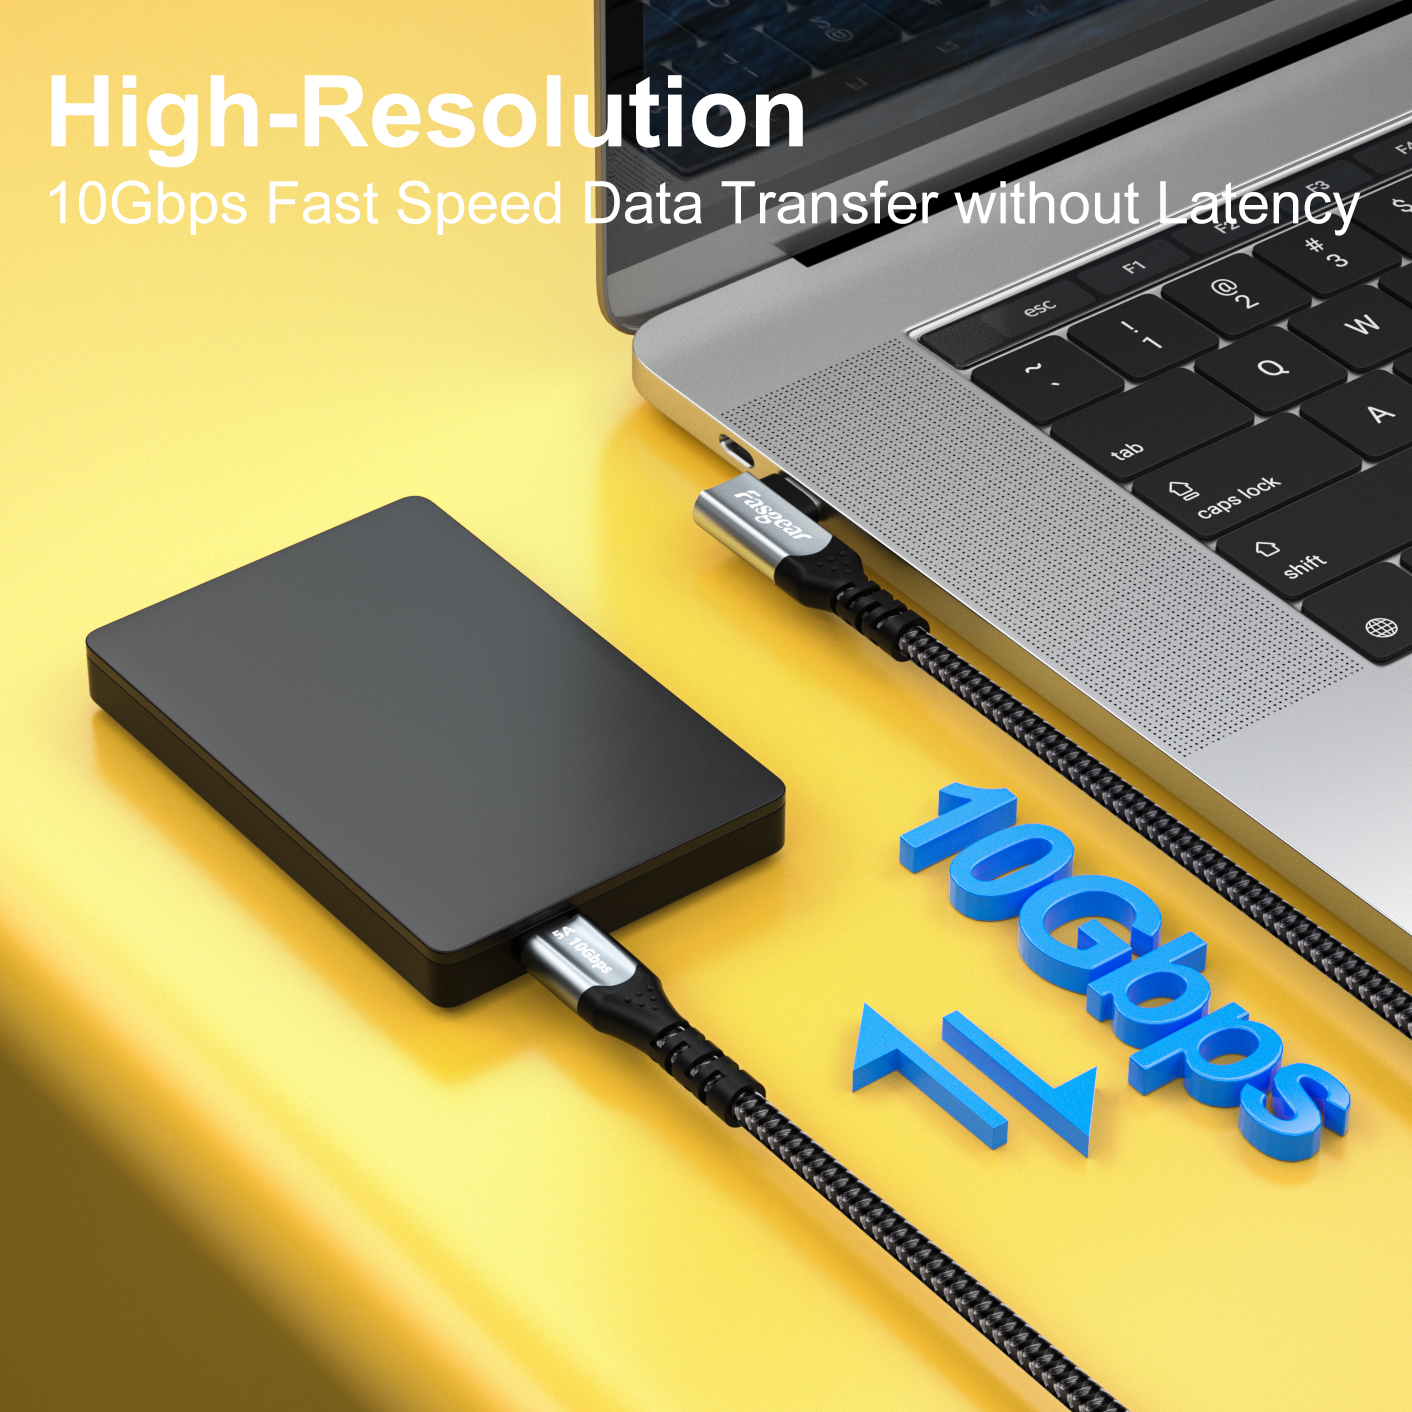 4K@60Hz Video Output Fasgear USB C to Type C Cable 10Gbps Data Transfer 100W 20V/5A Power Delivery Compatible for Type-C Device 1 Pack USB 3.1 Type C Gen 2 Fast Charge Cable Black, 6ft